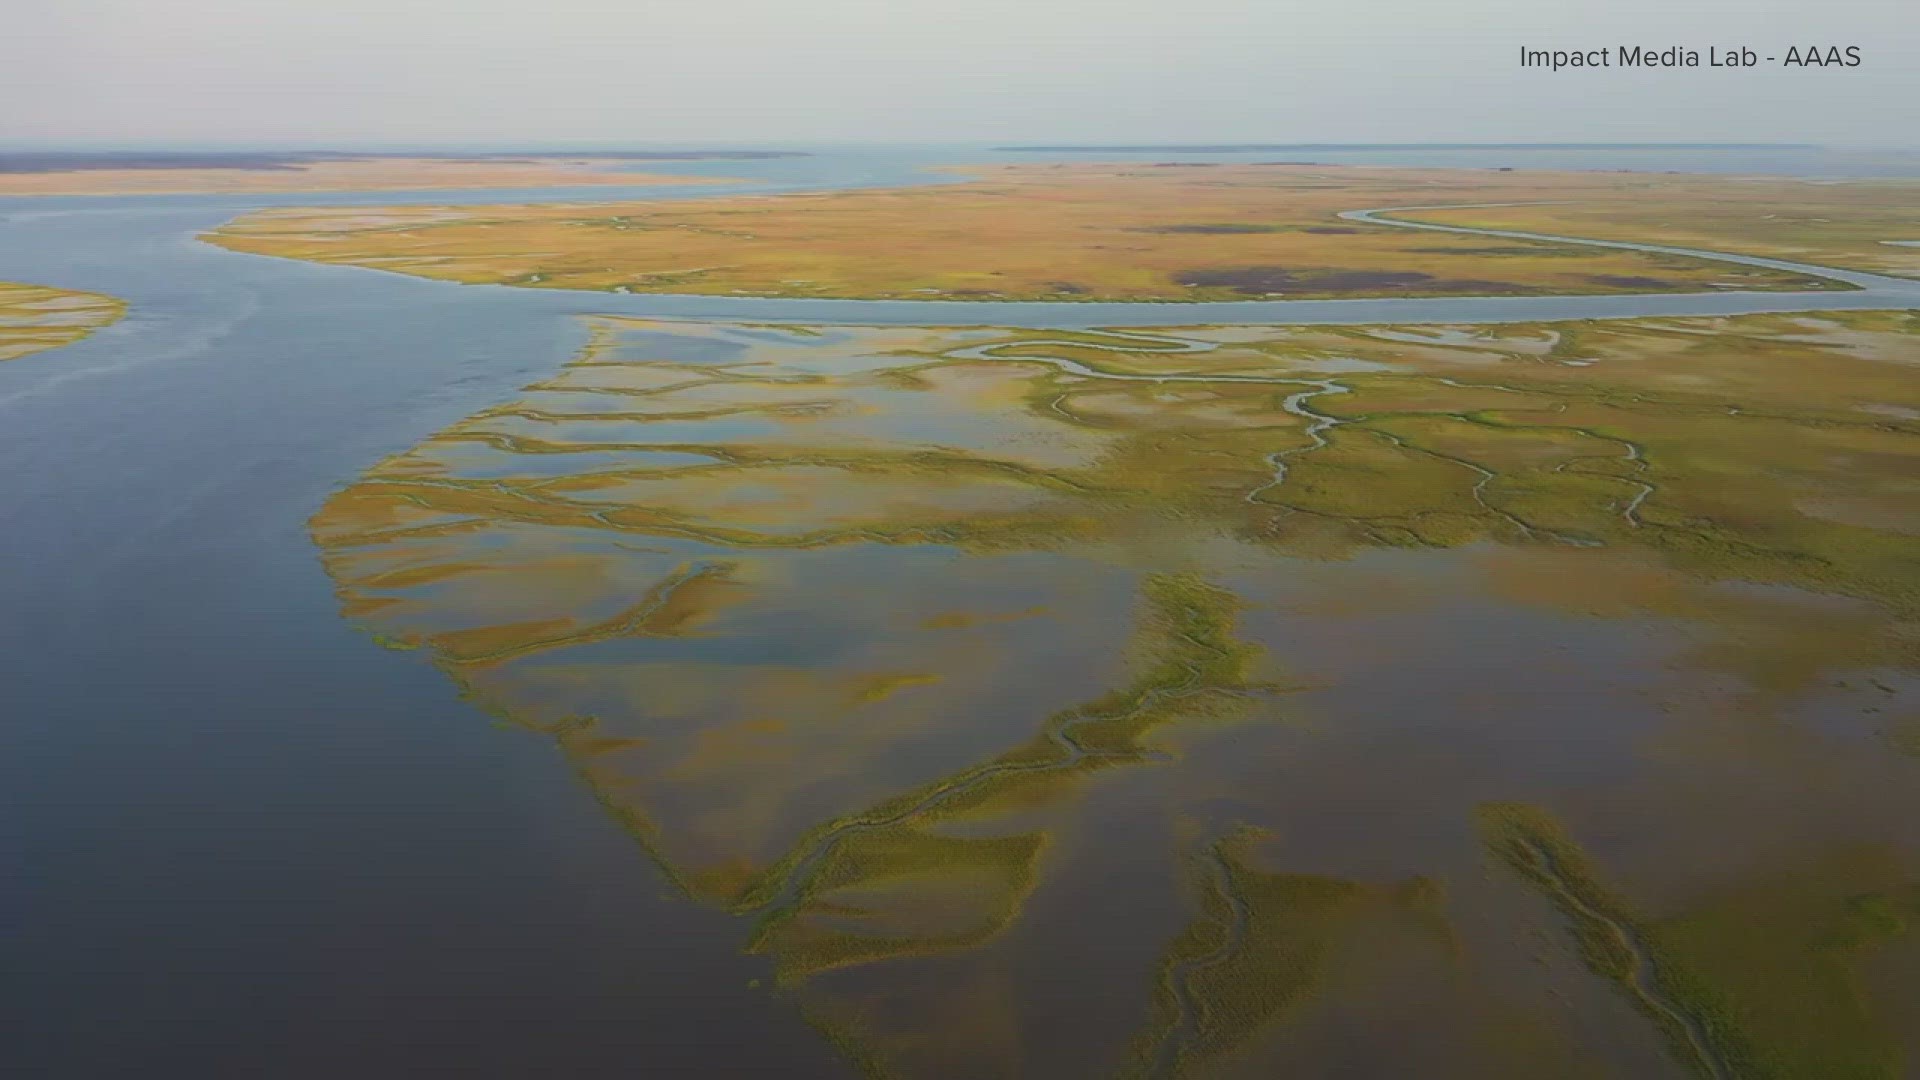 Rising seas and development near our marshes threaten their ability to protect us from storms in the future